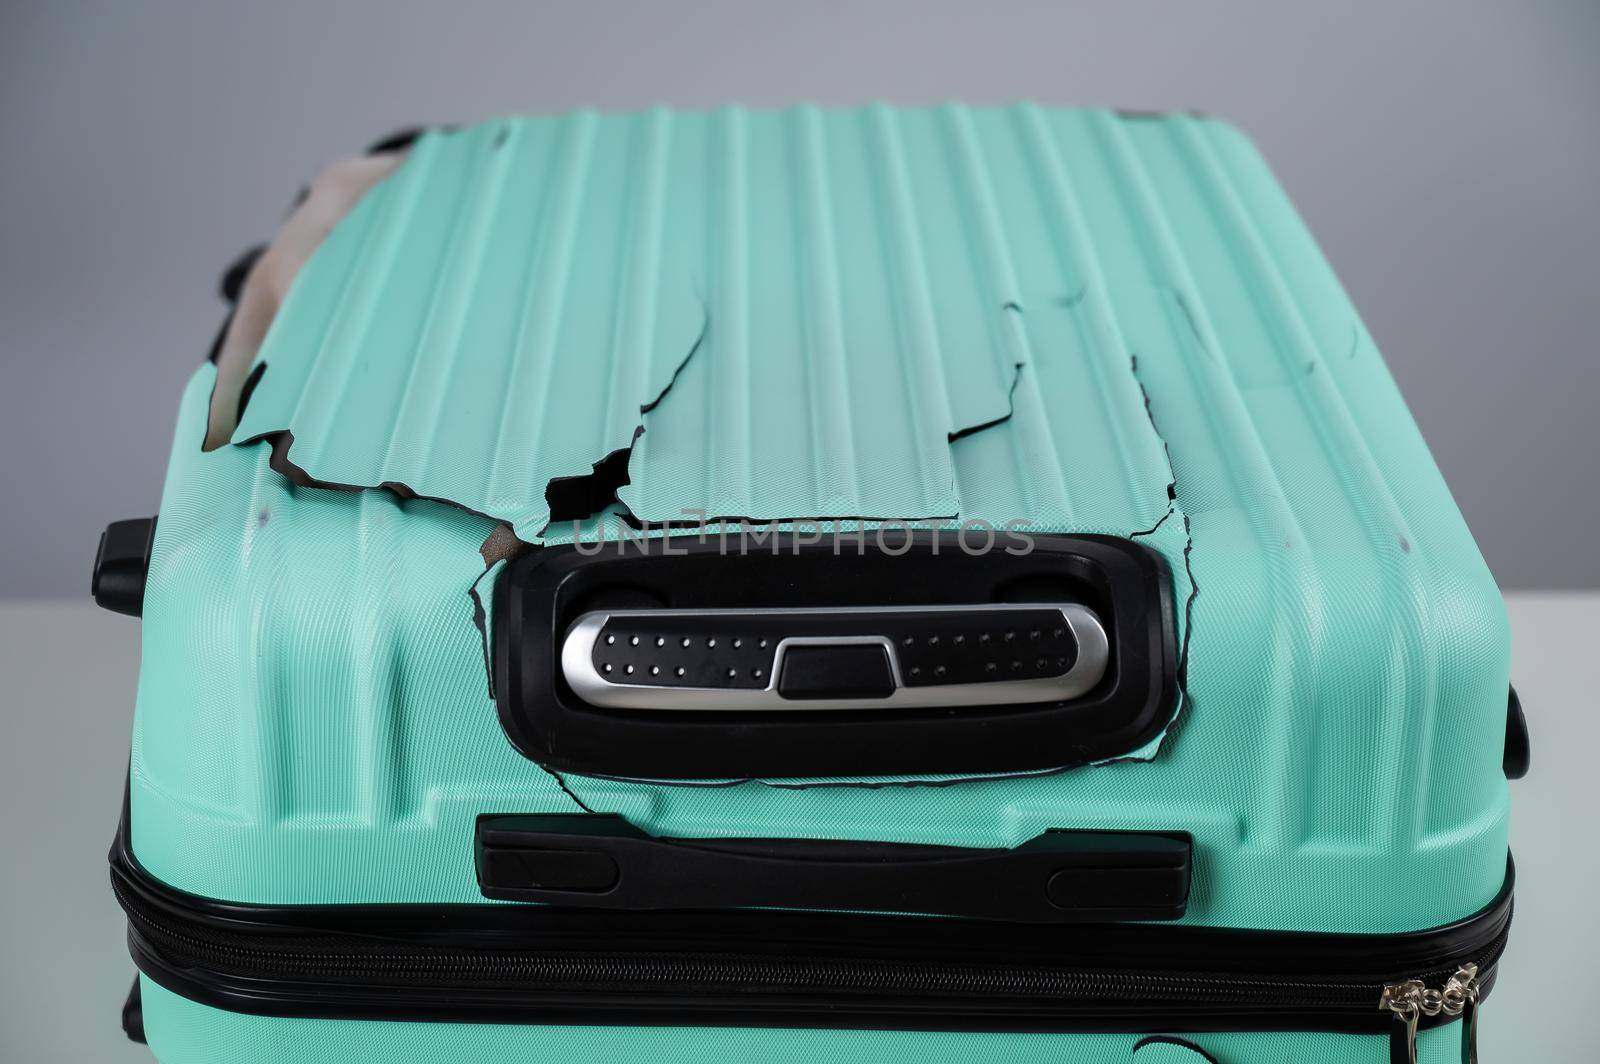 Broken plastic mint suitcase on a white background